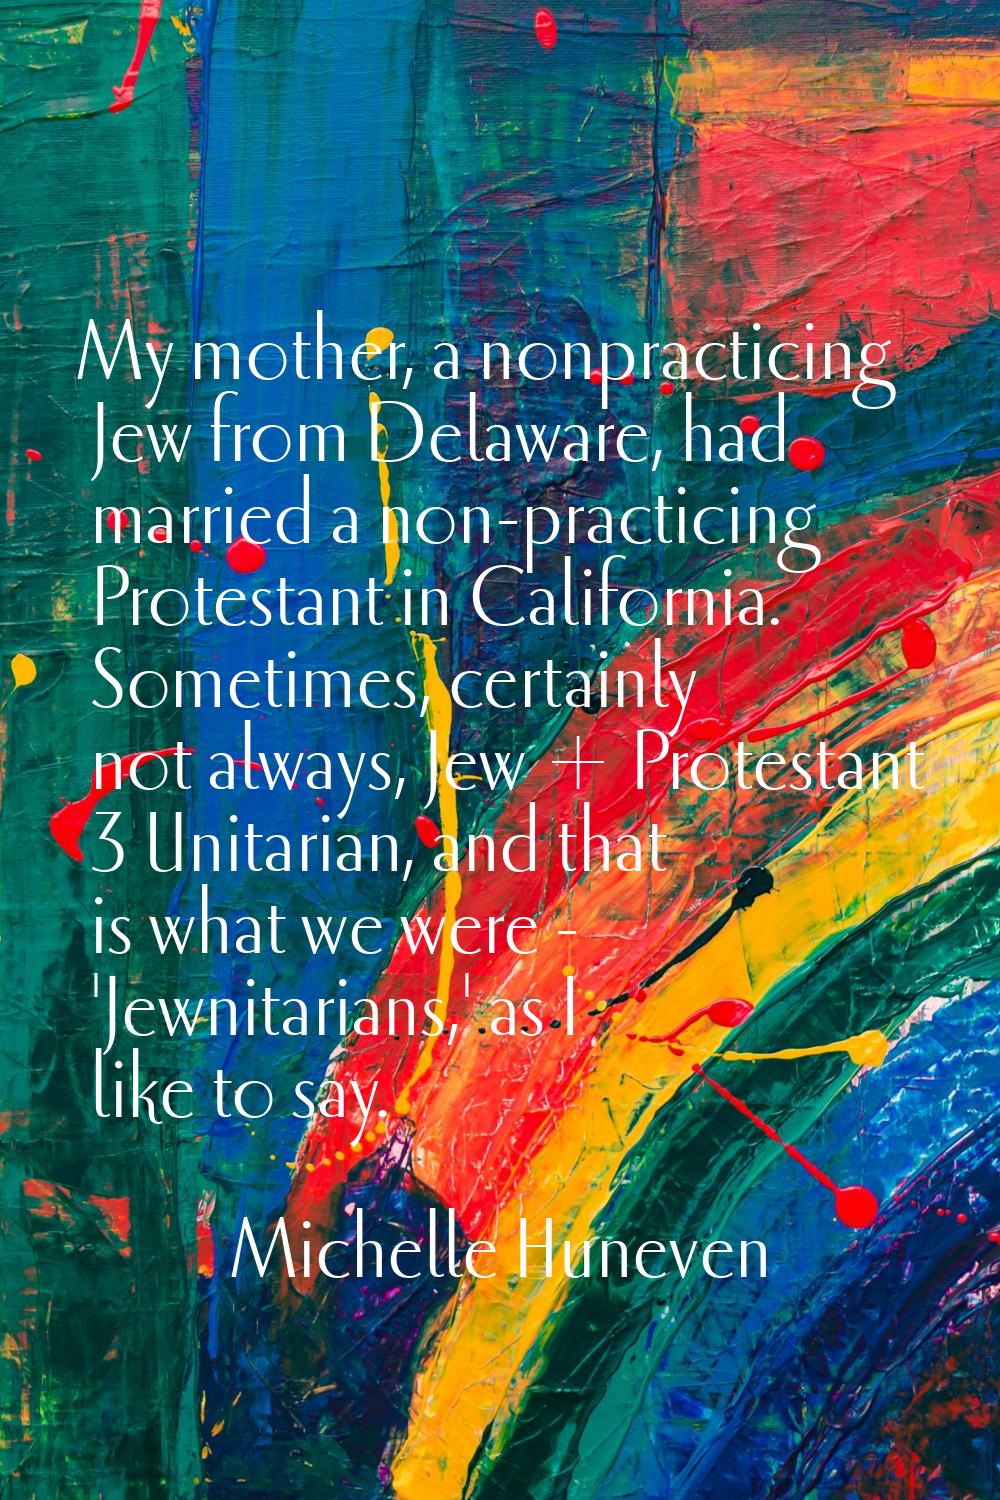 My mother, a nonpracticing Jew from Delaware, had married a non-practicing Protestant in California